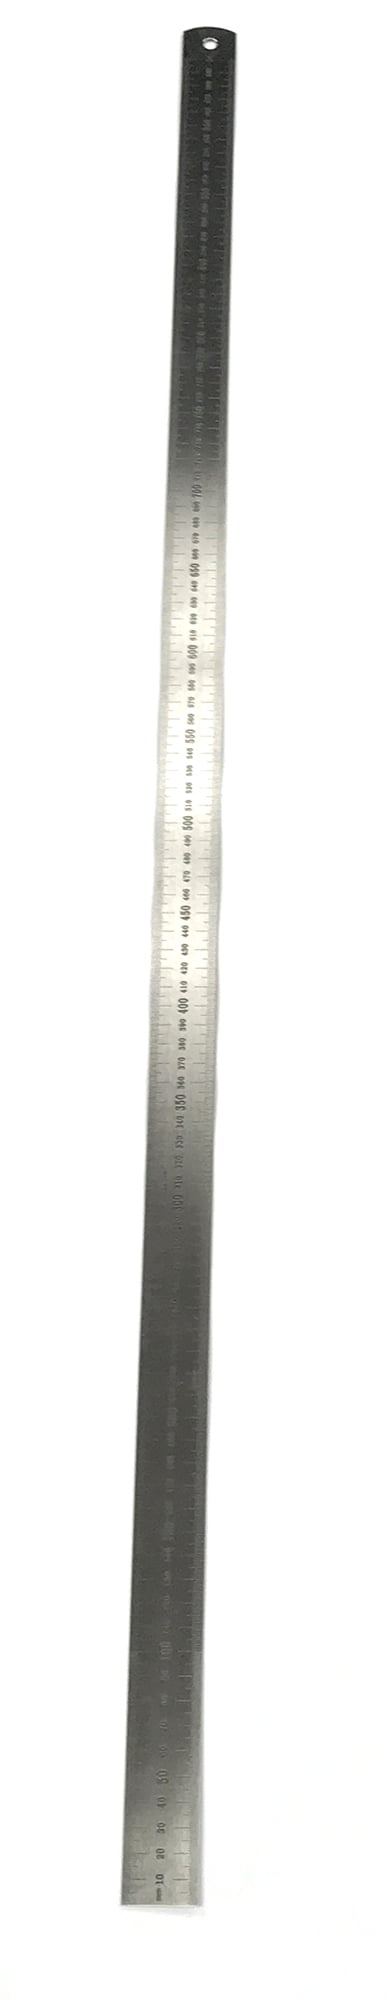 30cm Stainless Steel Ruler with Stamped mm and cm Graduations - Eisco —  Eisco Labs